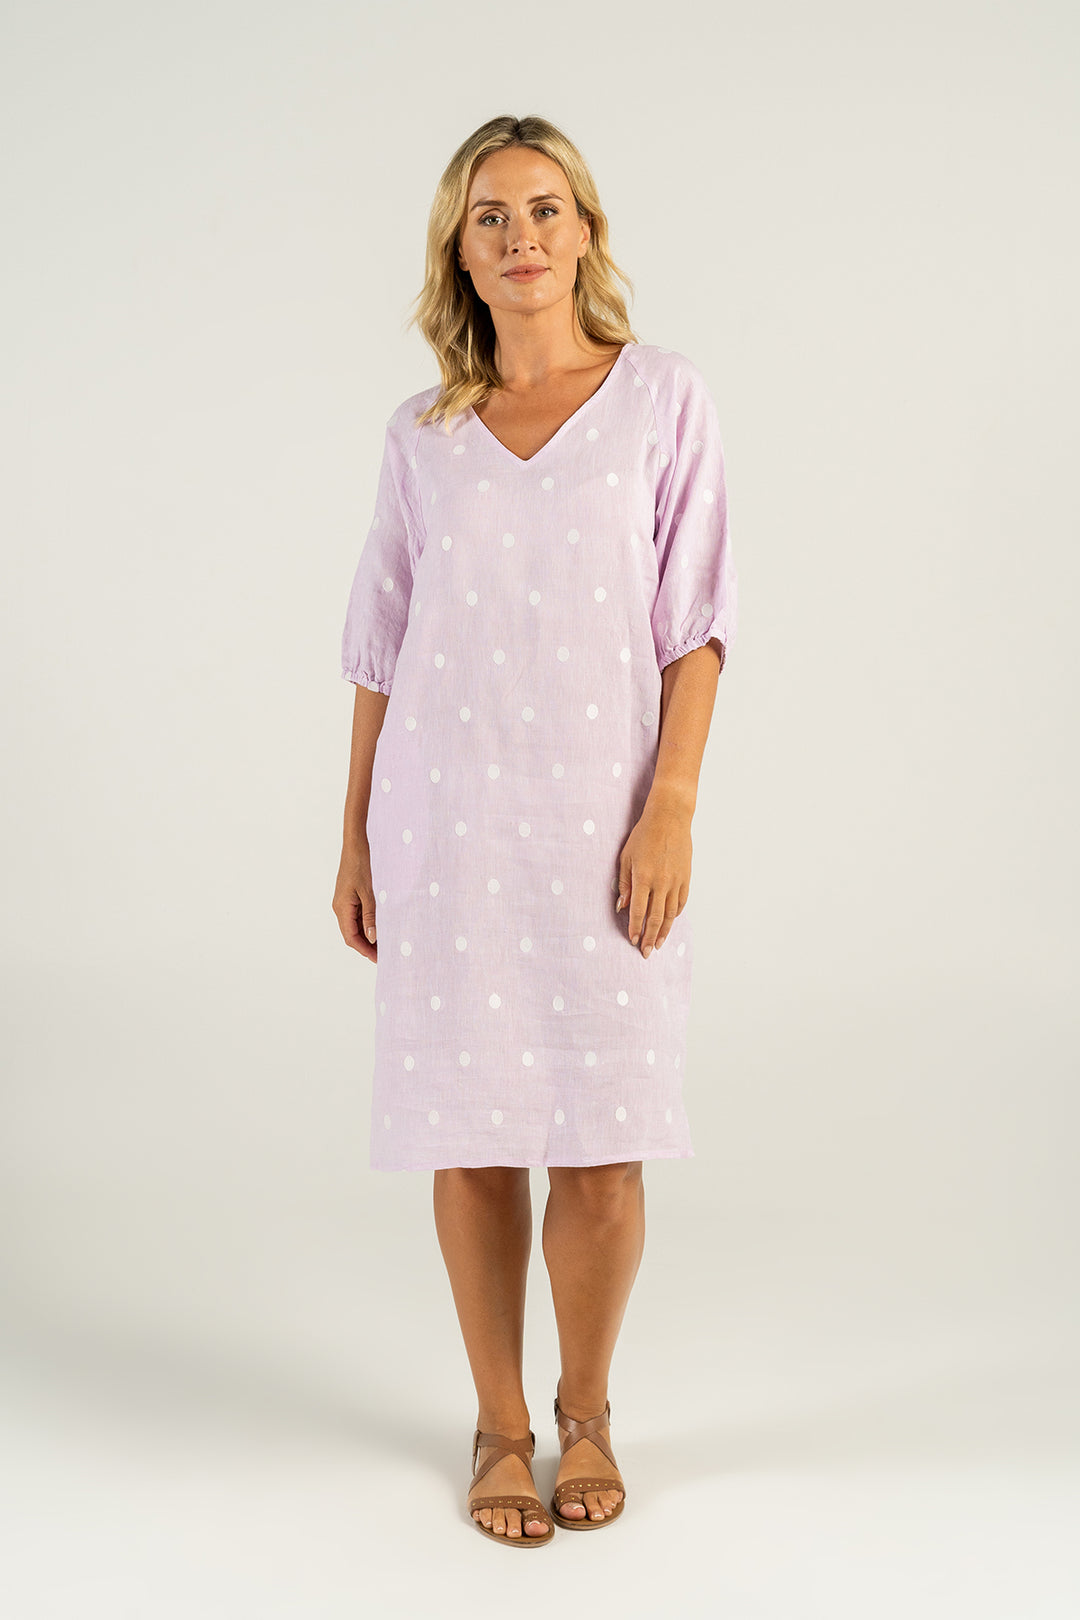 Woman wearing a pink linen dress with white spots by See Saw clothing, sold and shipped from Pizazz Boutique Nelson Bay online women's clothes shops Australia